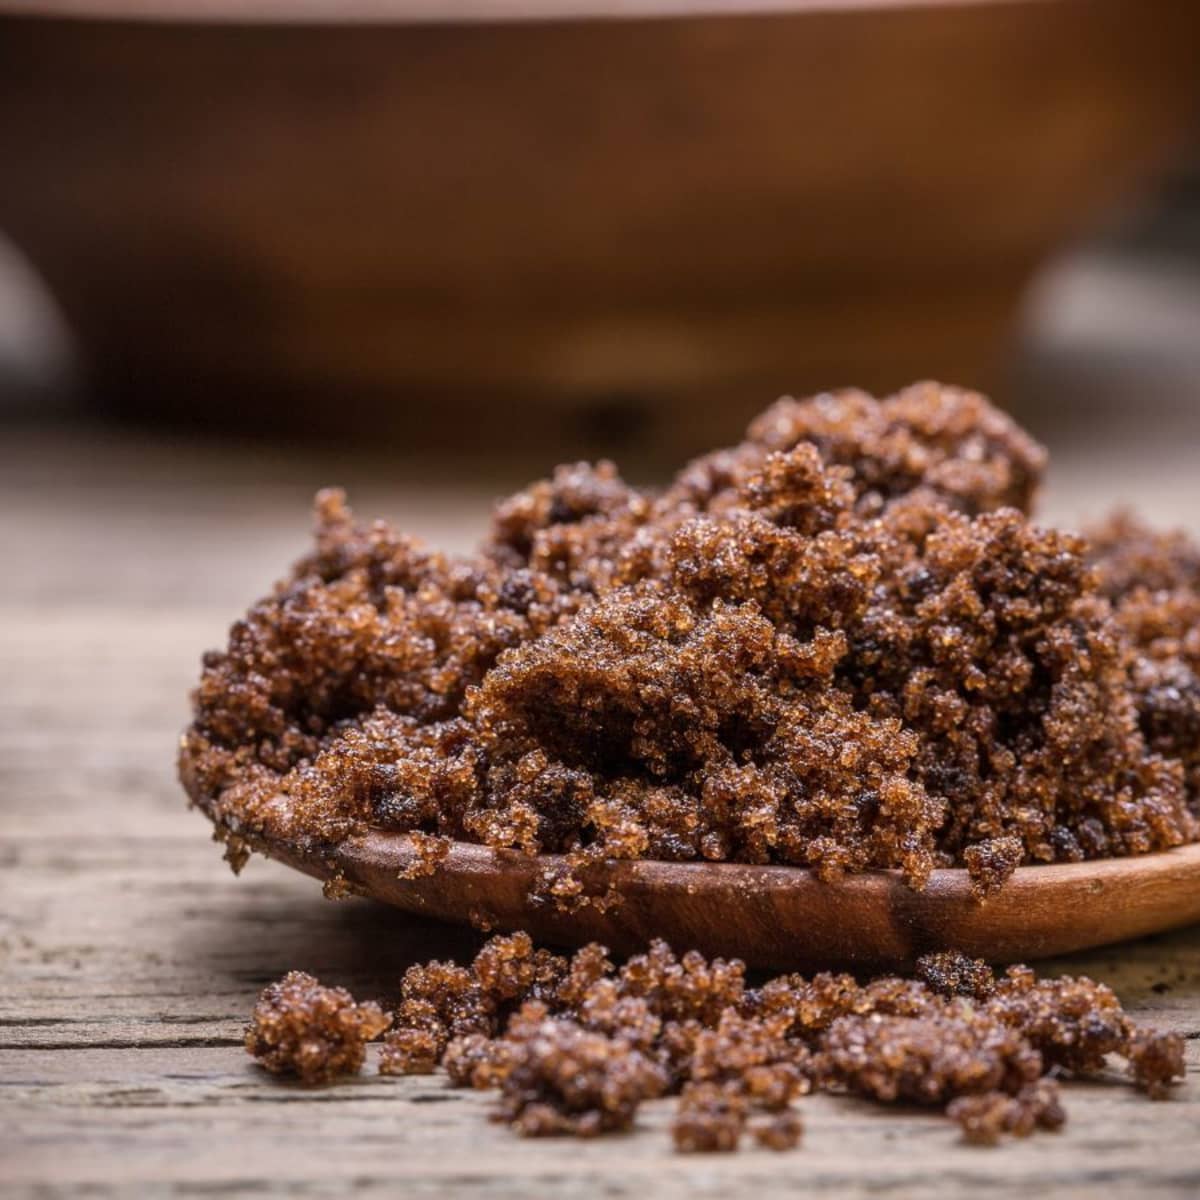 Muscovado vs brown sugar: what's the difference?